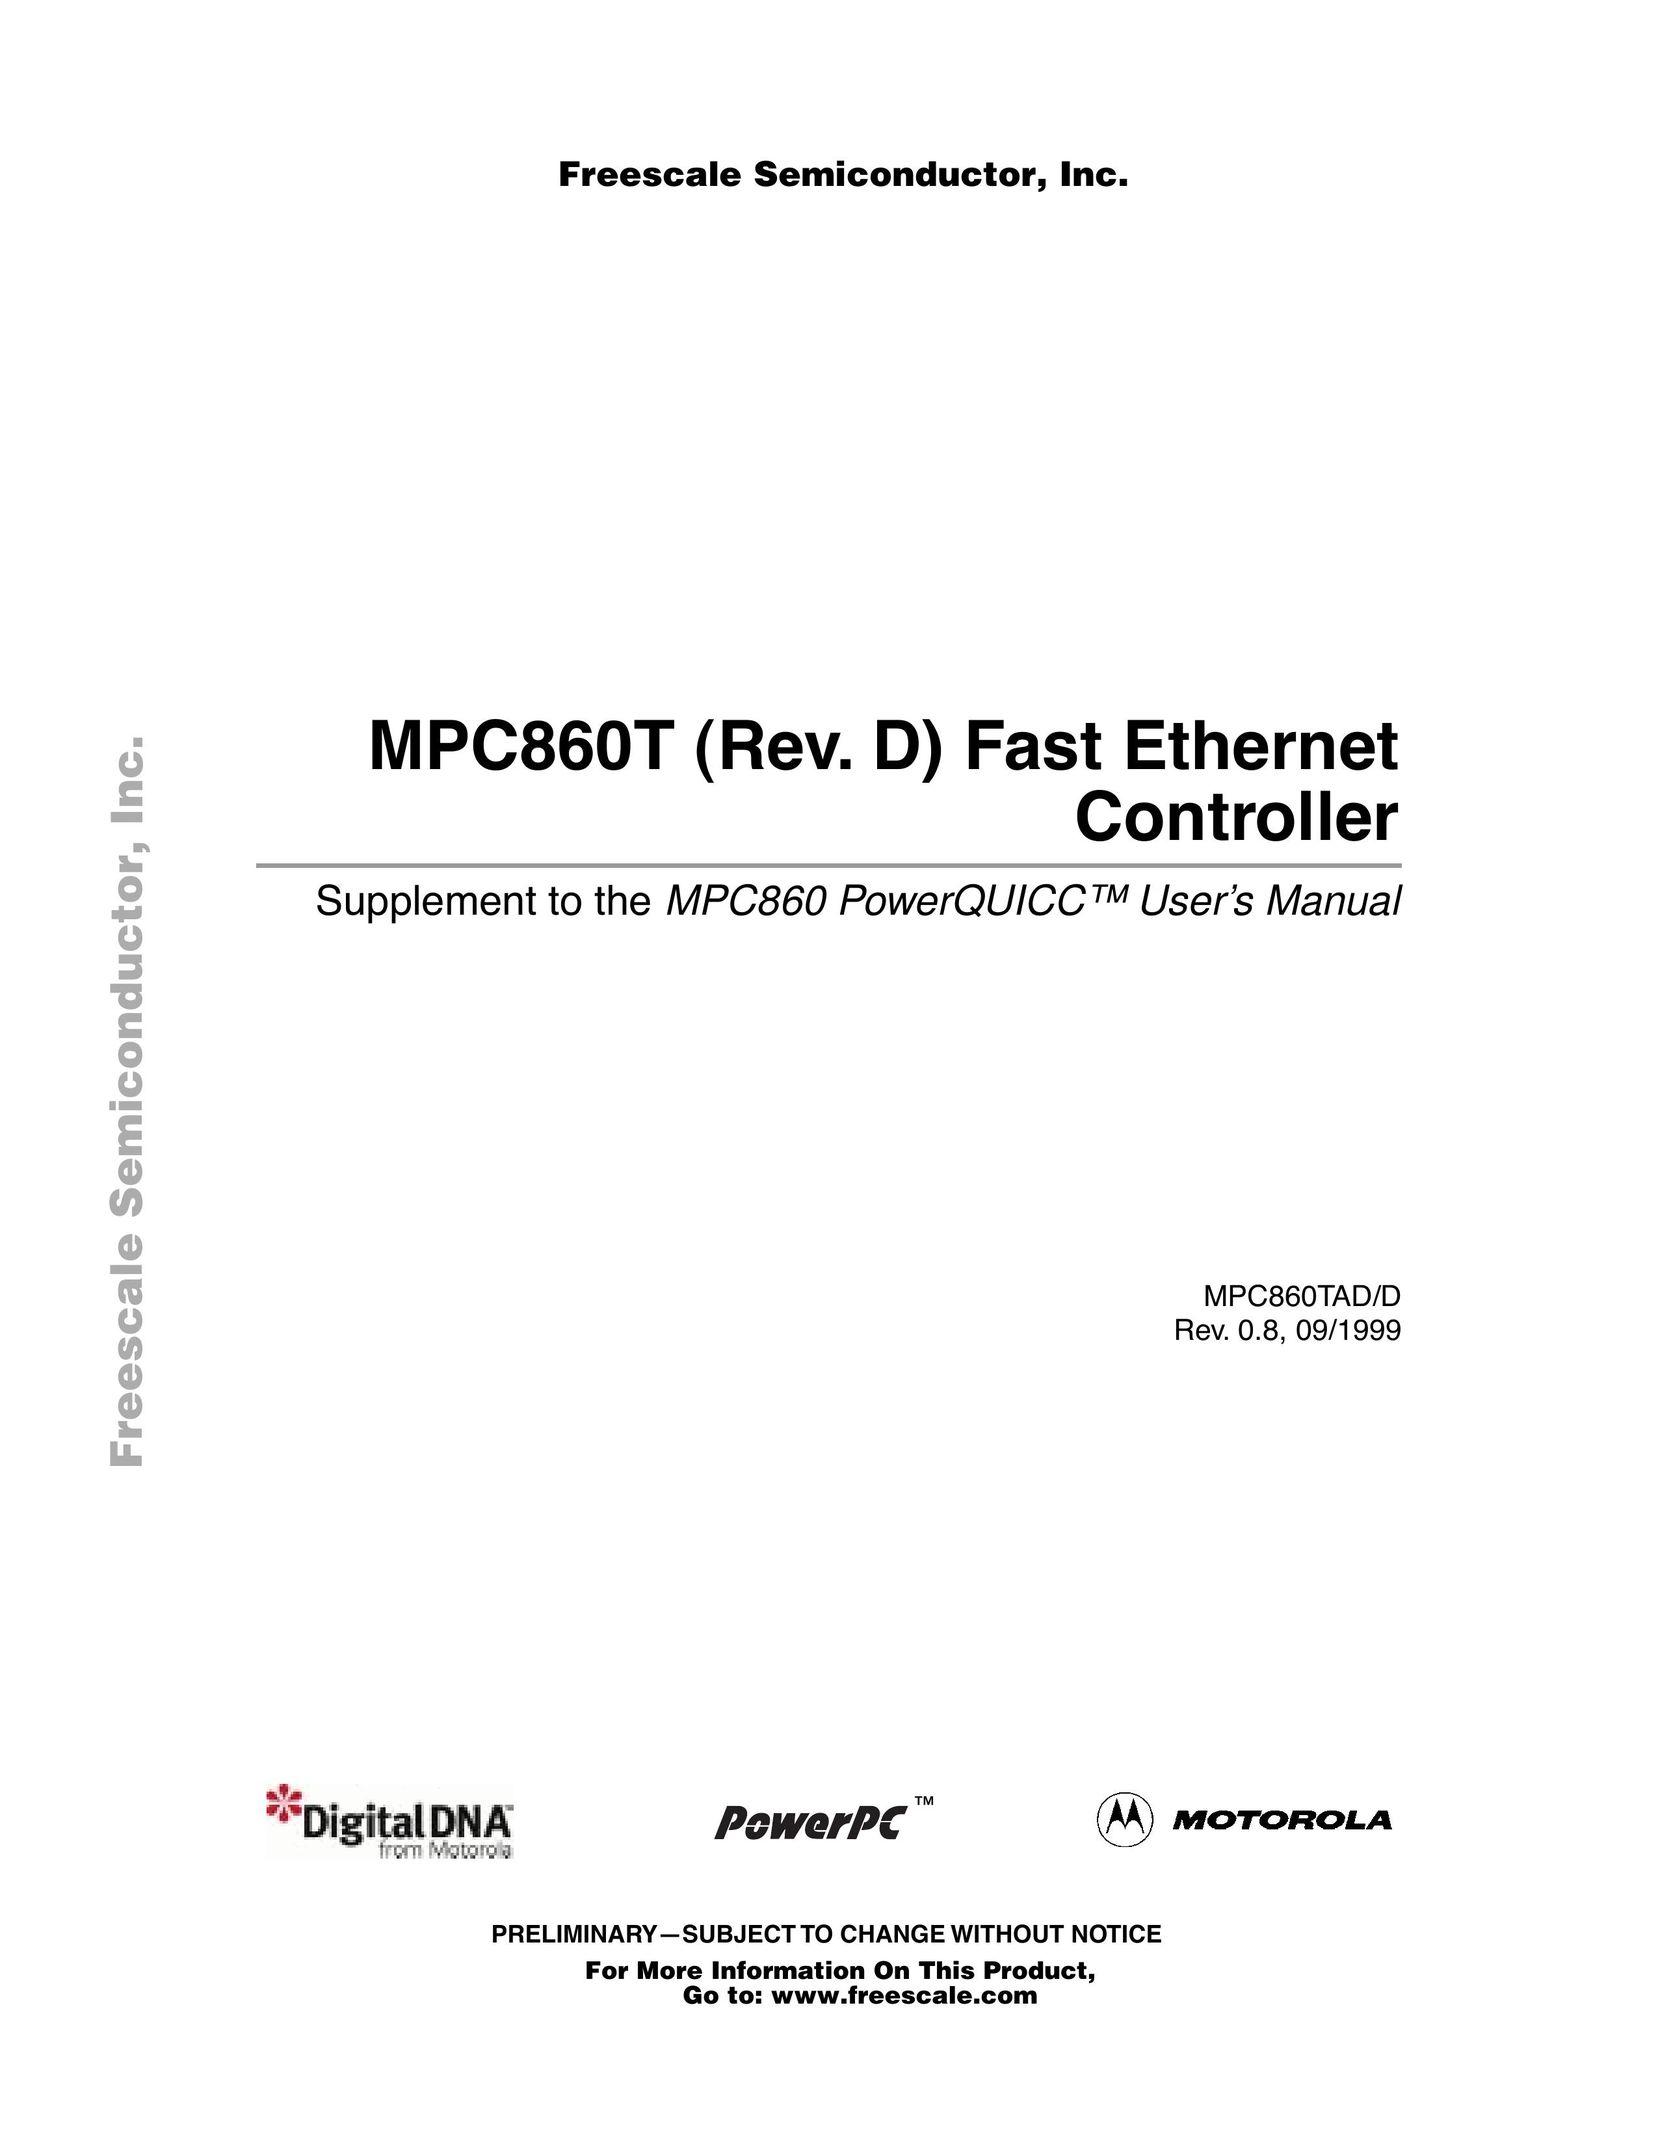 Freescale Semiconductor MPC860T Switch User Manual